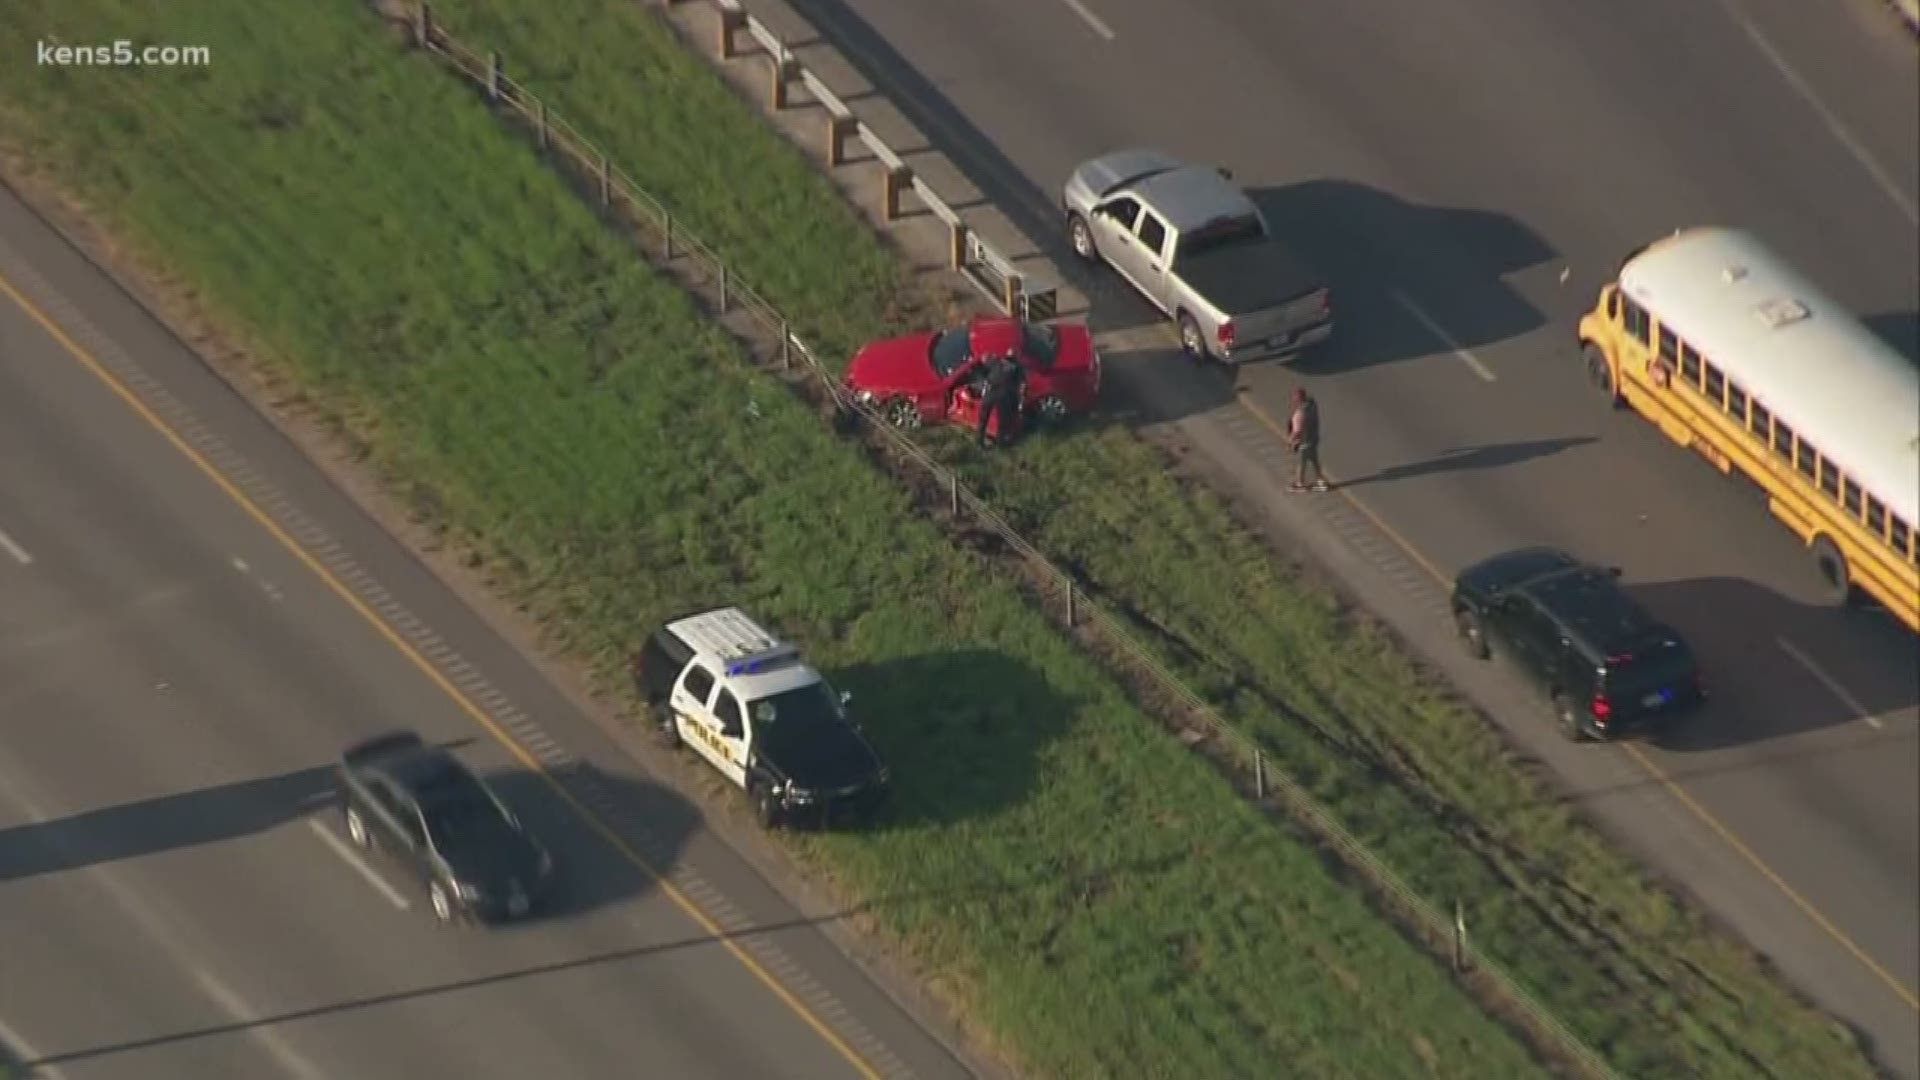 The short chase ended when the car crashed on Loop 410 just south of I-10 on the east side.